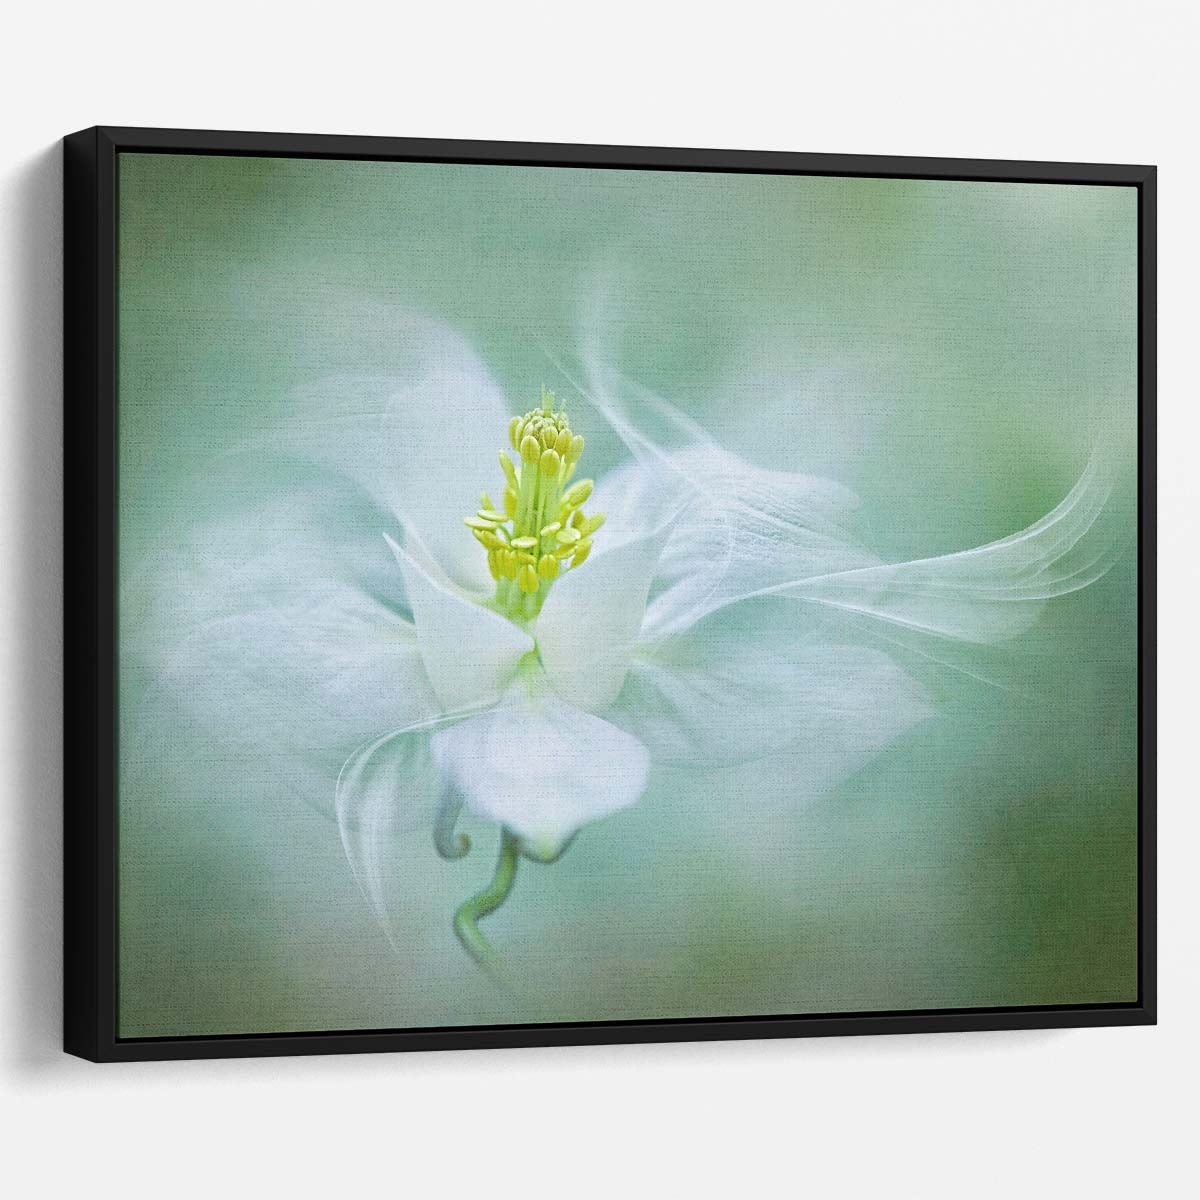 Delicate White Aquilegia Bloom Macro Wall Art by Luxuriance Designs. Made in USA.